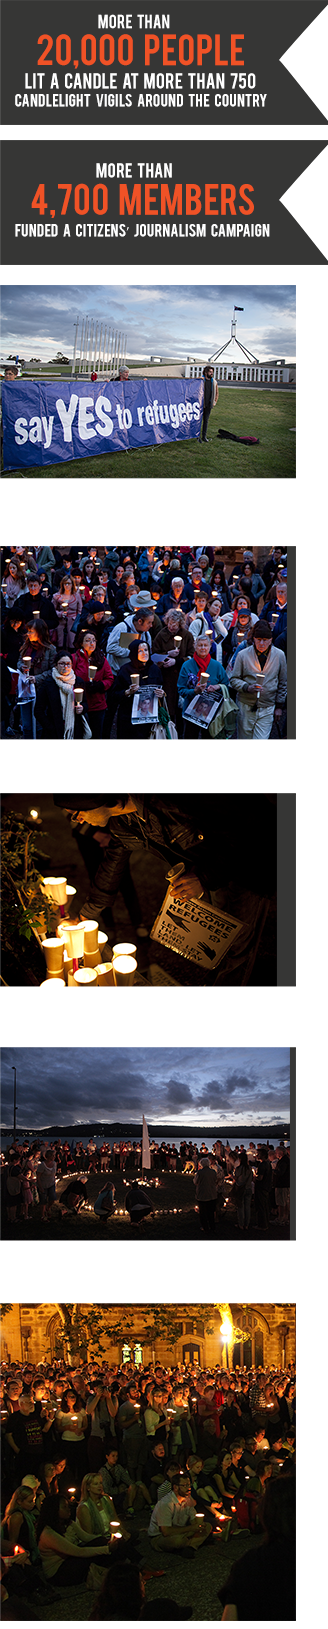 More than 20,000 people lit a candle at more than 750 candlelight vigils around the country. More than 4,700 members funded a citizens’ journalism campaign